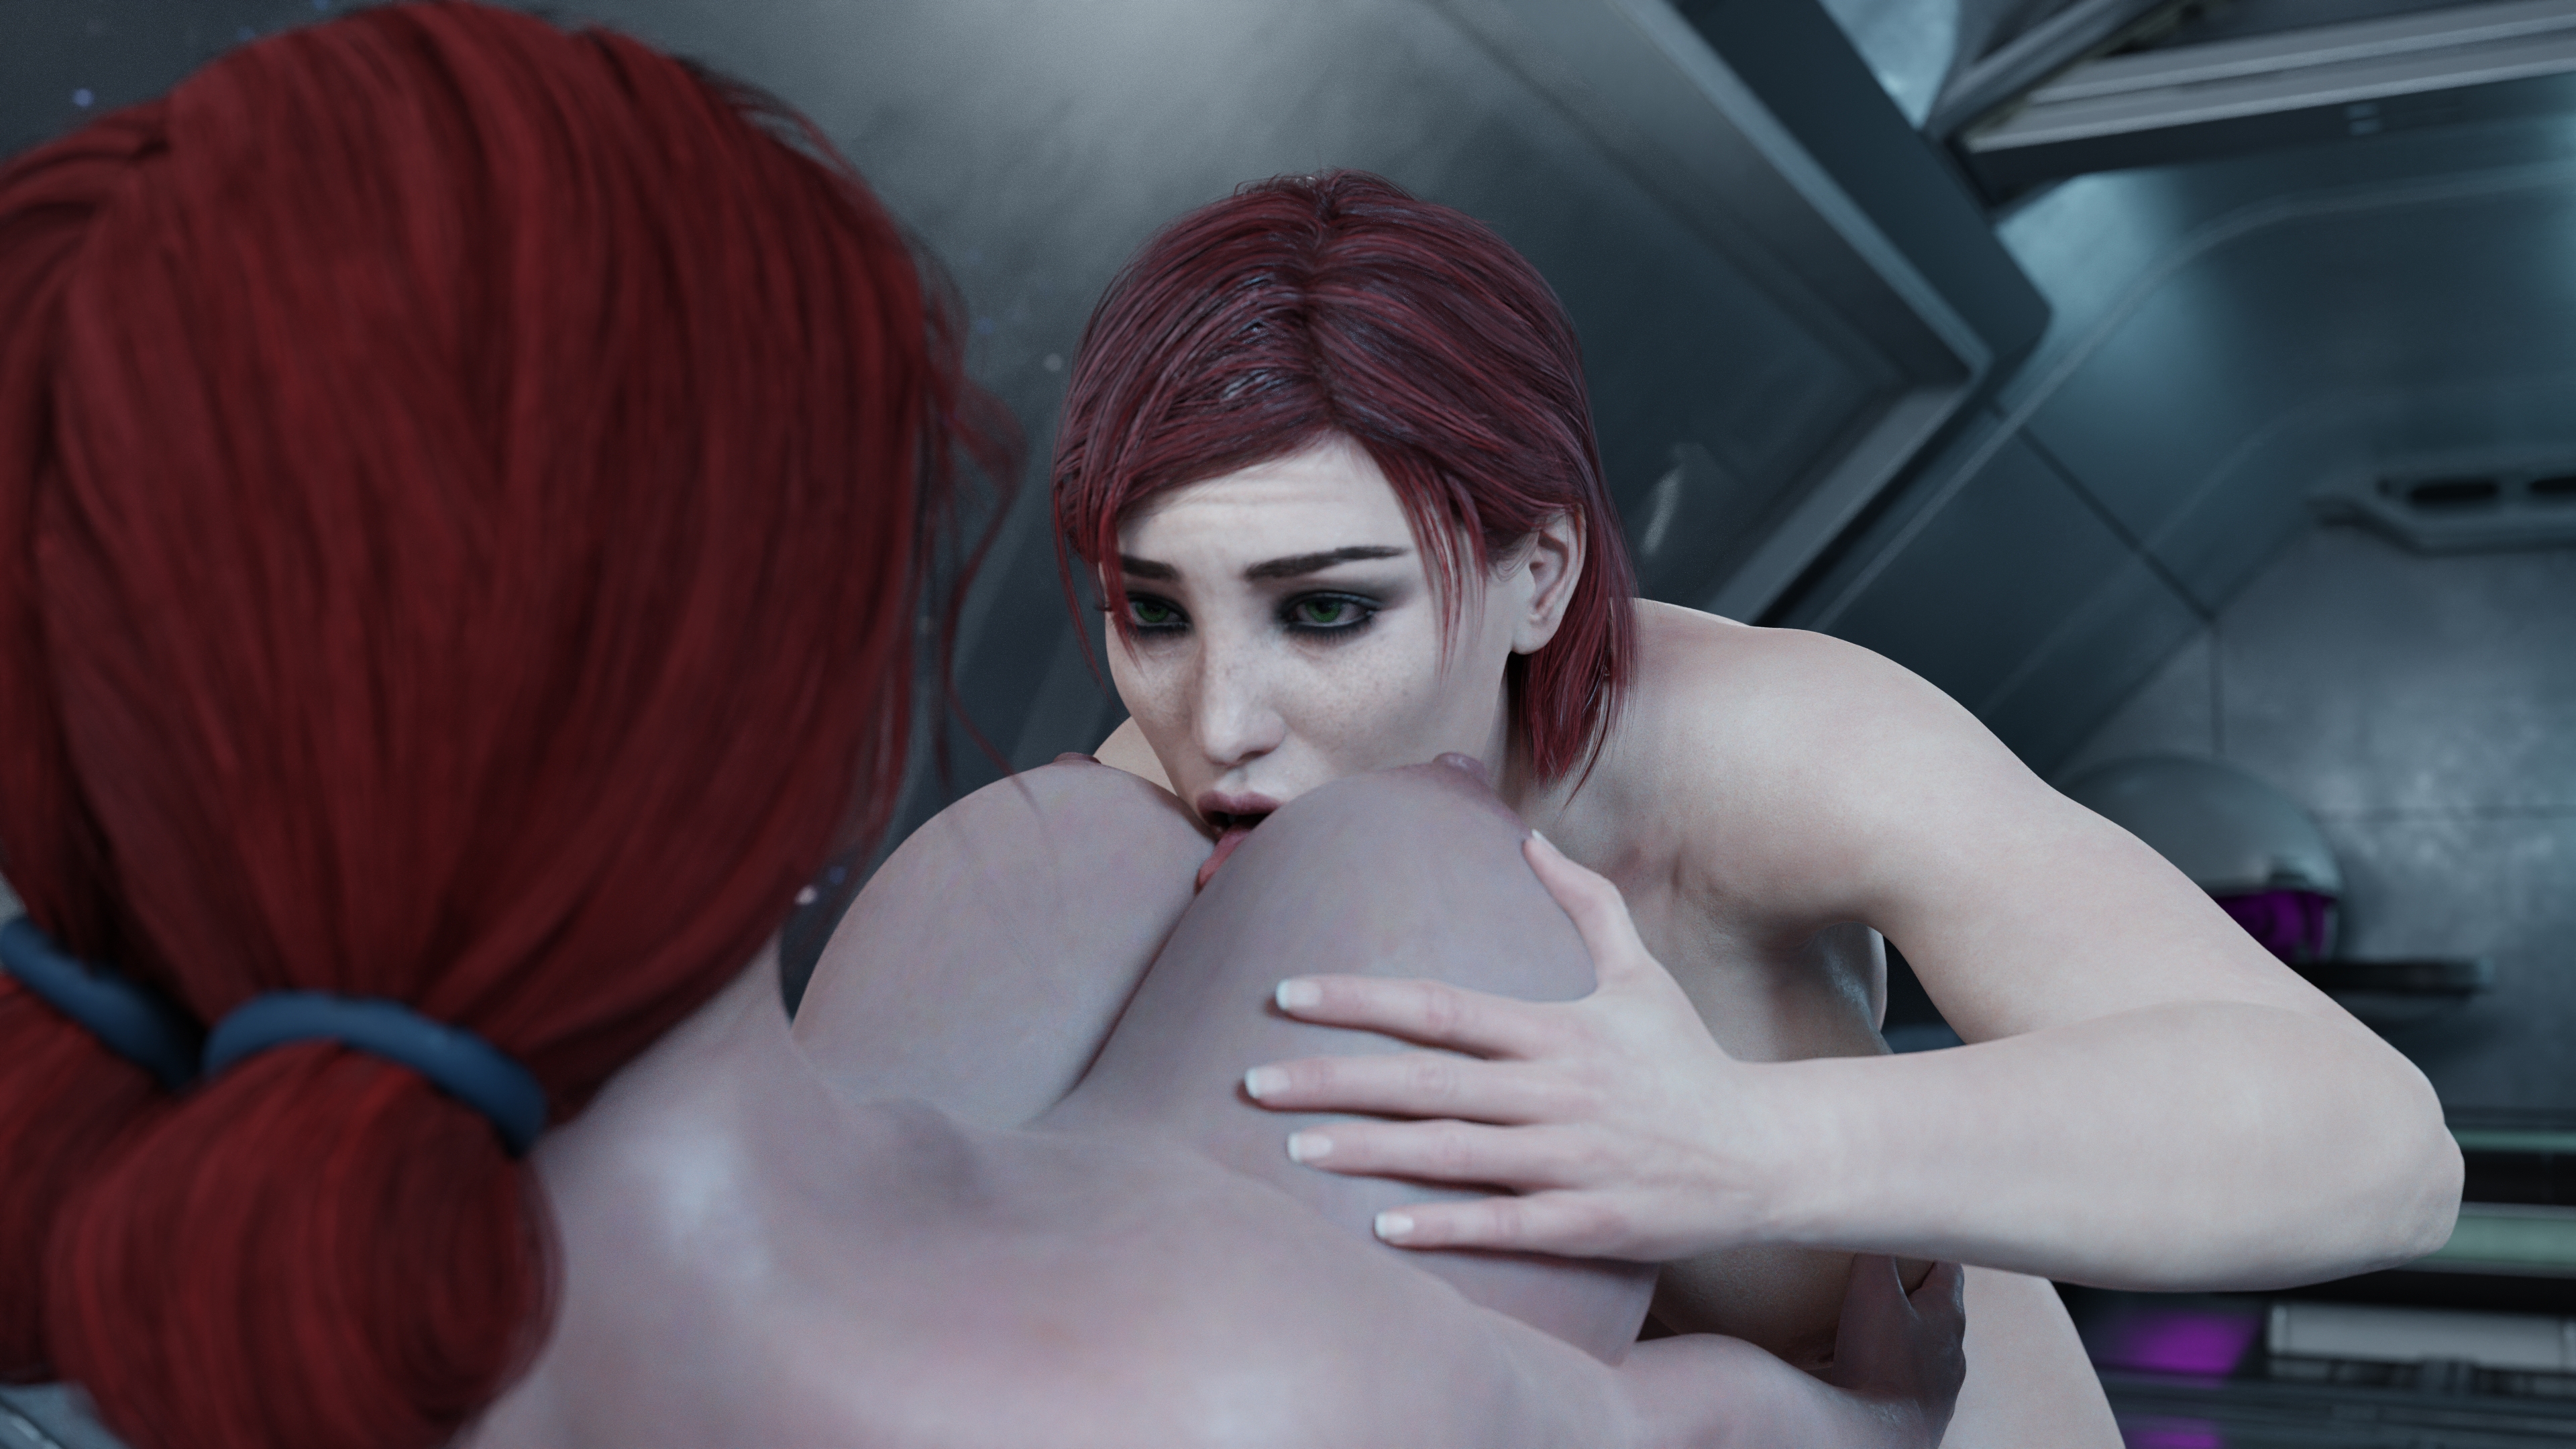 Triss & Jane Mass Effect The Witcher Triss Merigold Femshep Big Tits Red Hair Red head 2 Girls Big Breasts Tongue Out Grab Boobs Smile Green Eyes 2